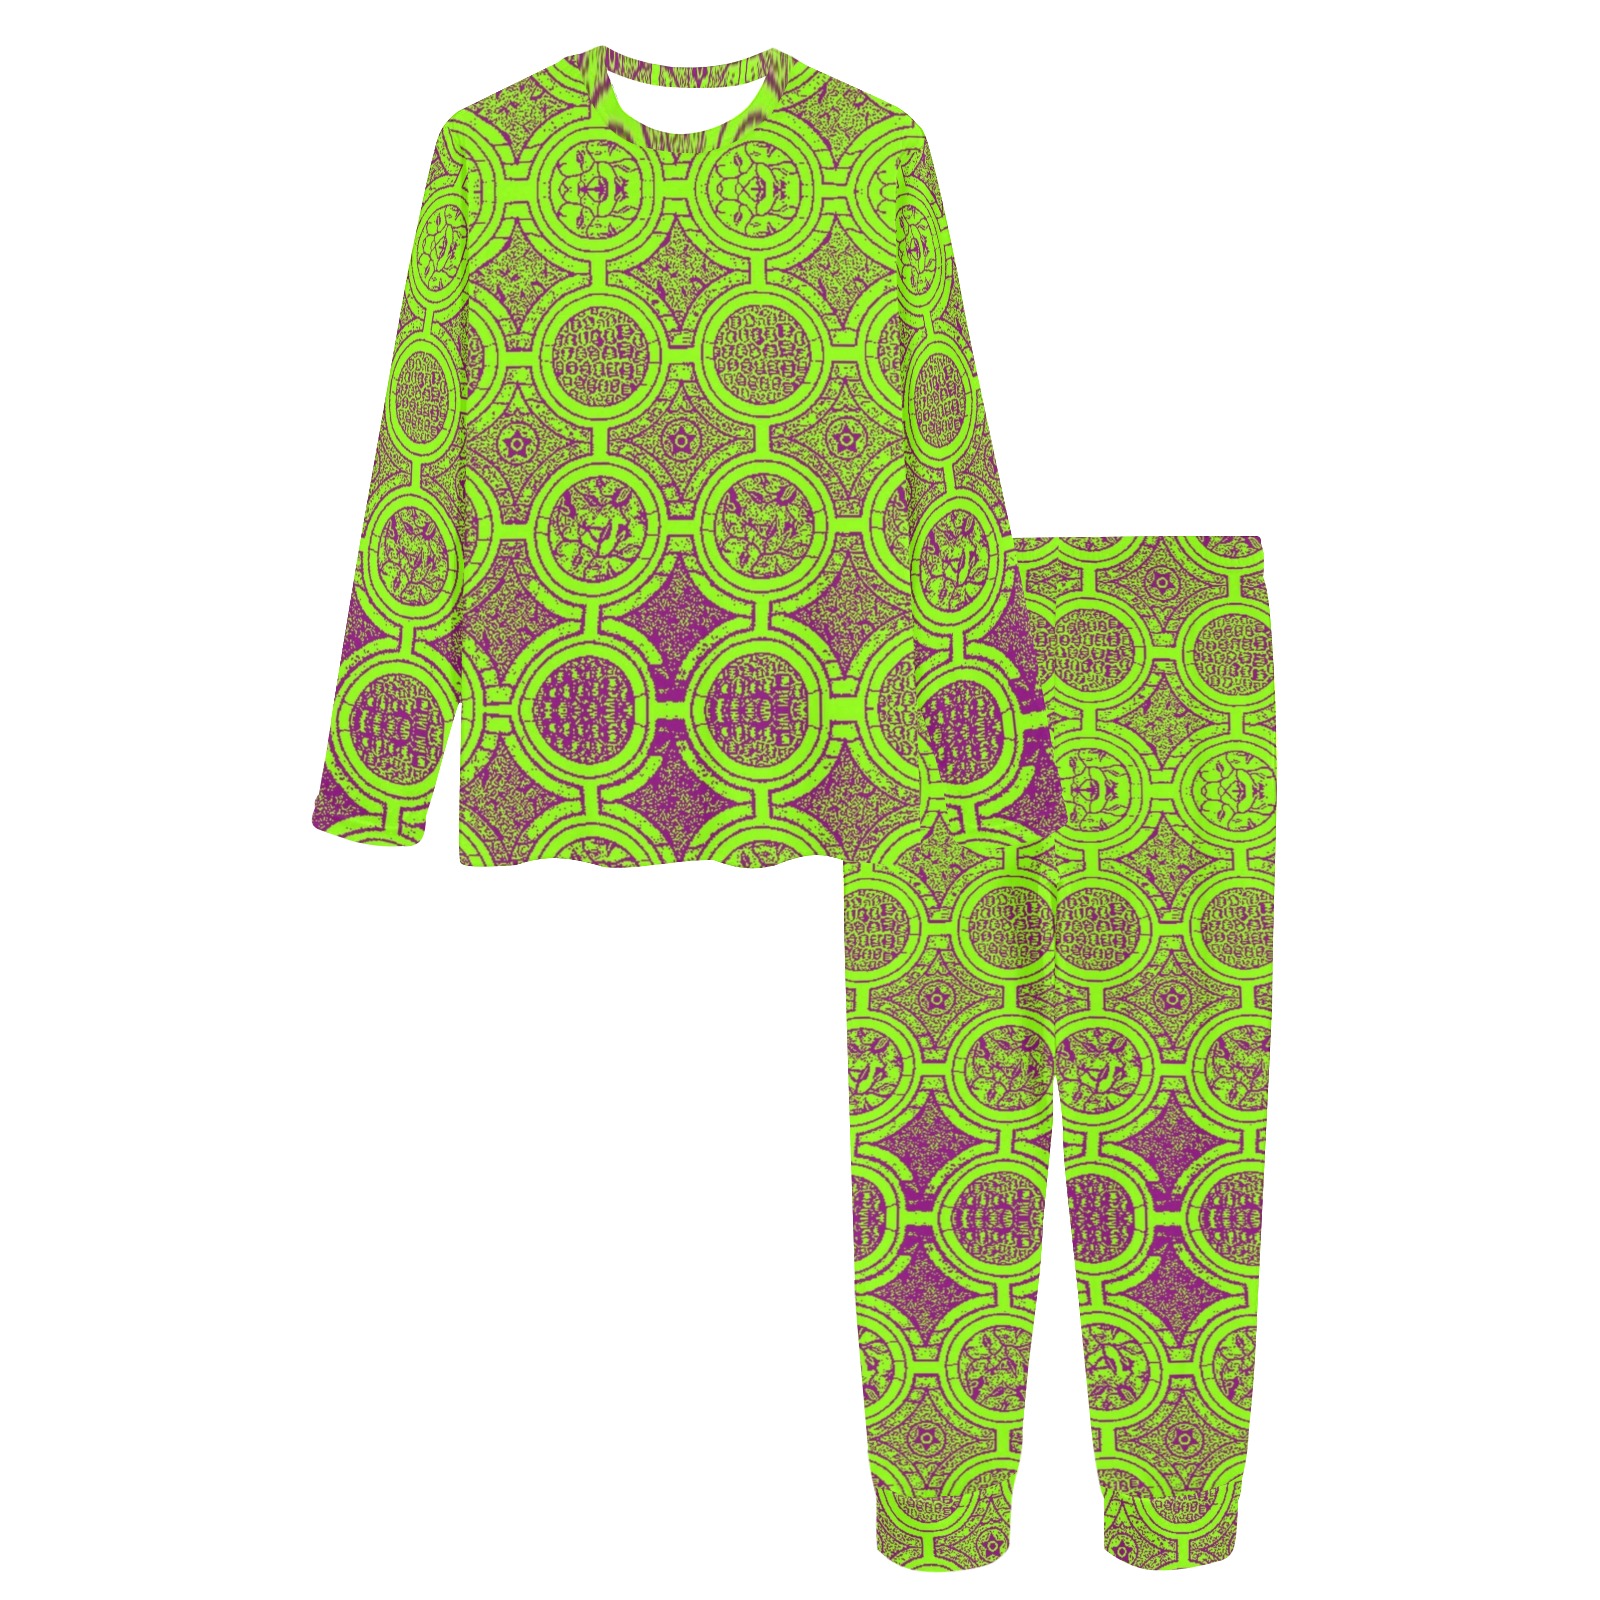 AFRICAN PRINT PATTERN 2 Women's All Over Print Pajama Set